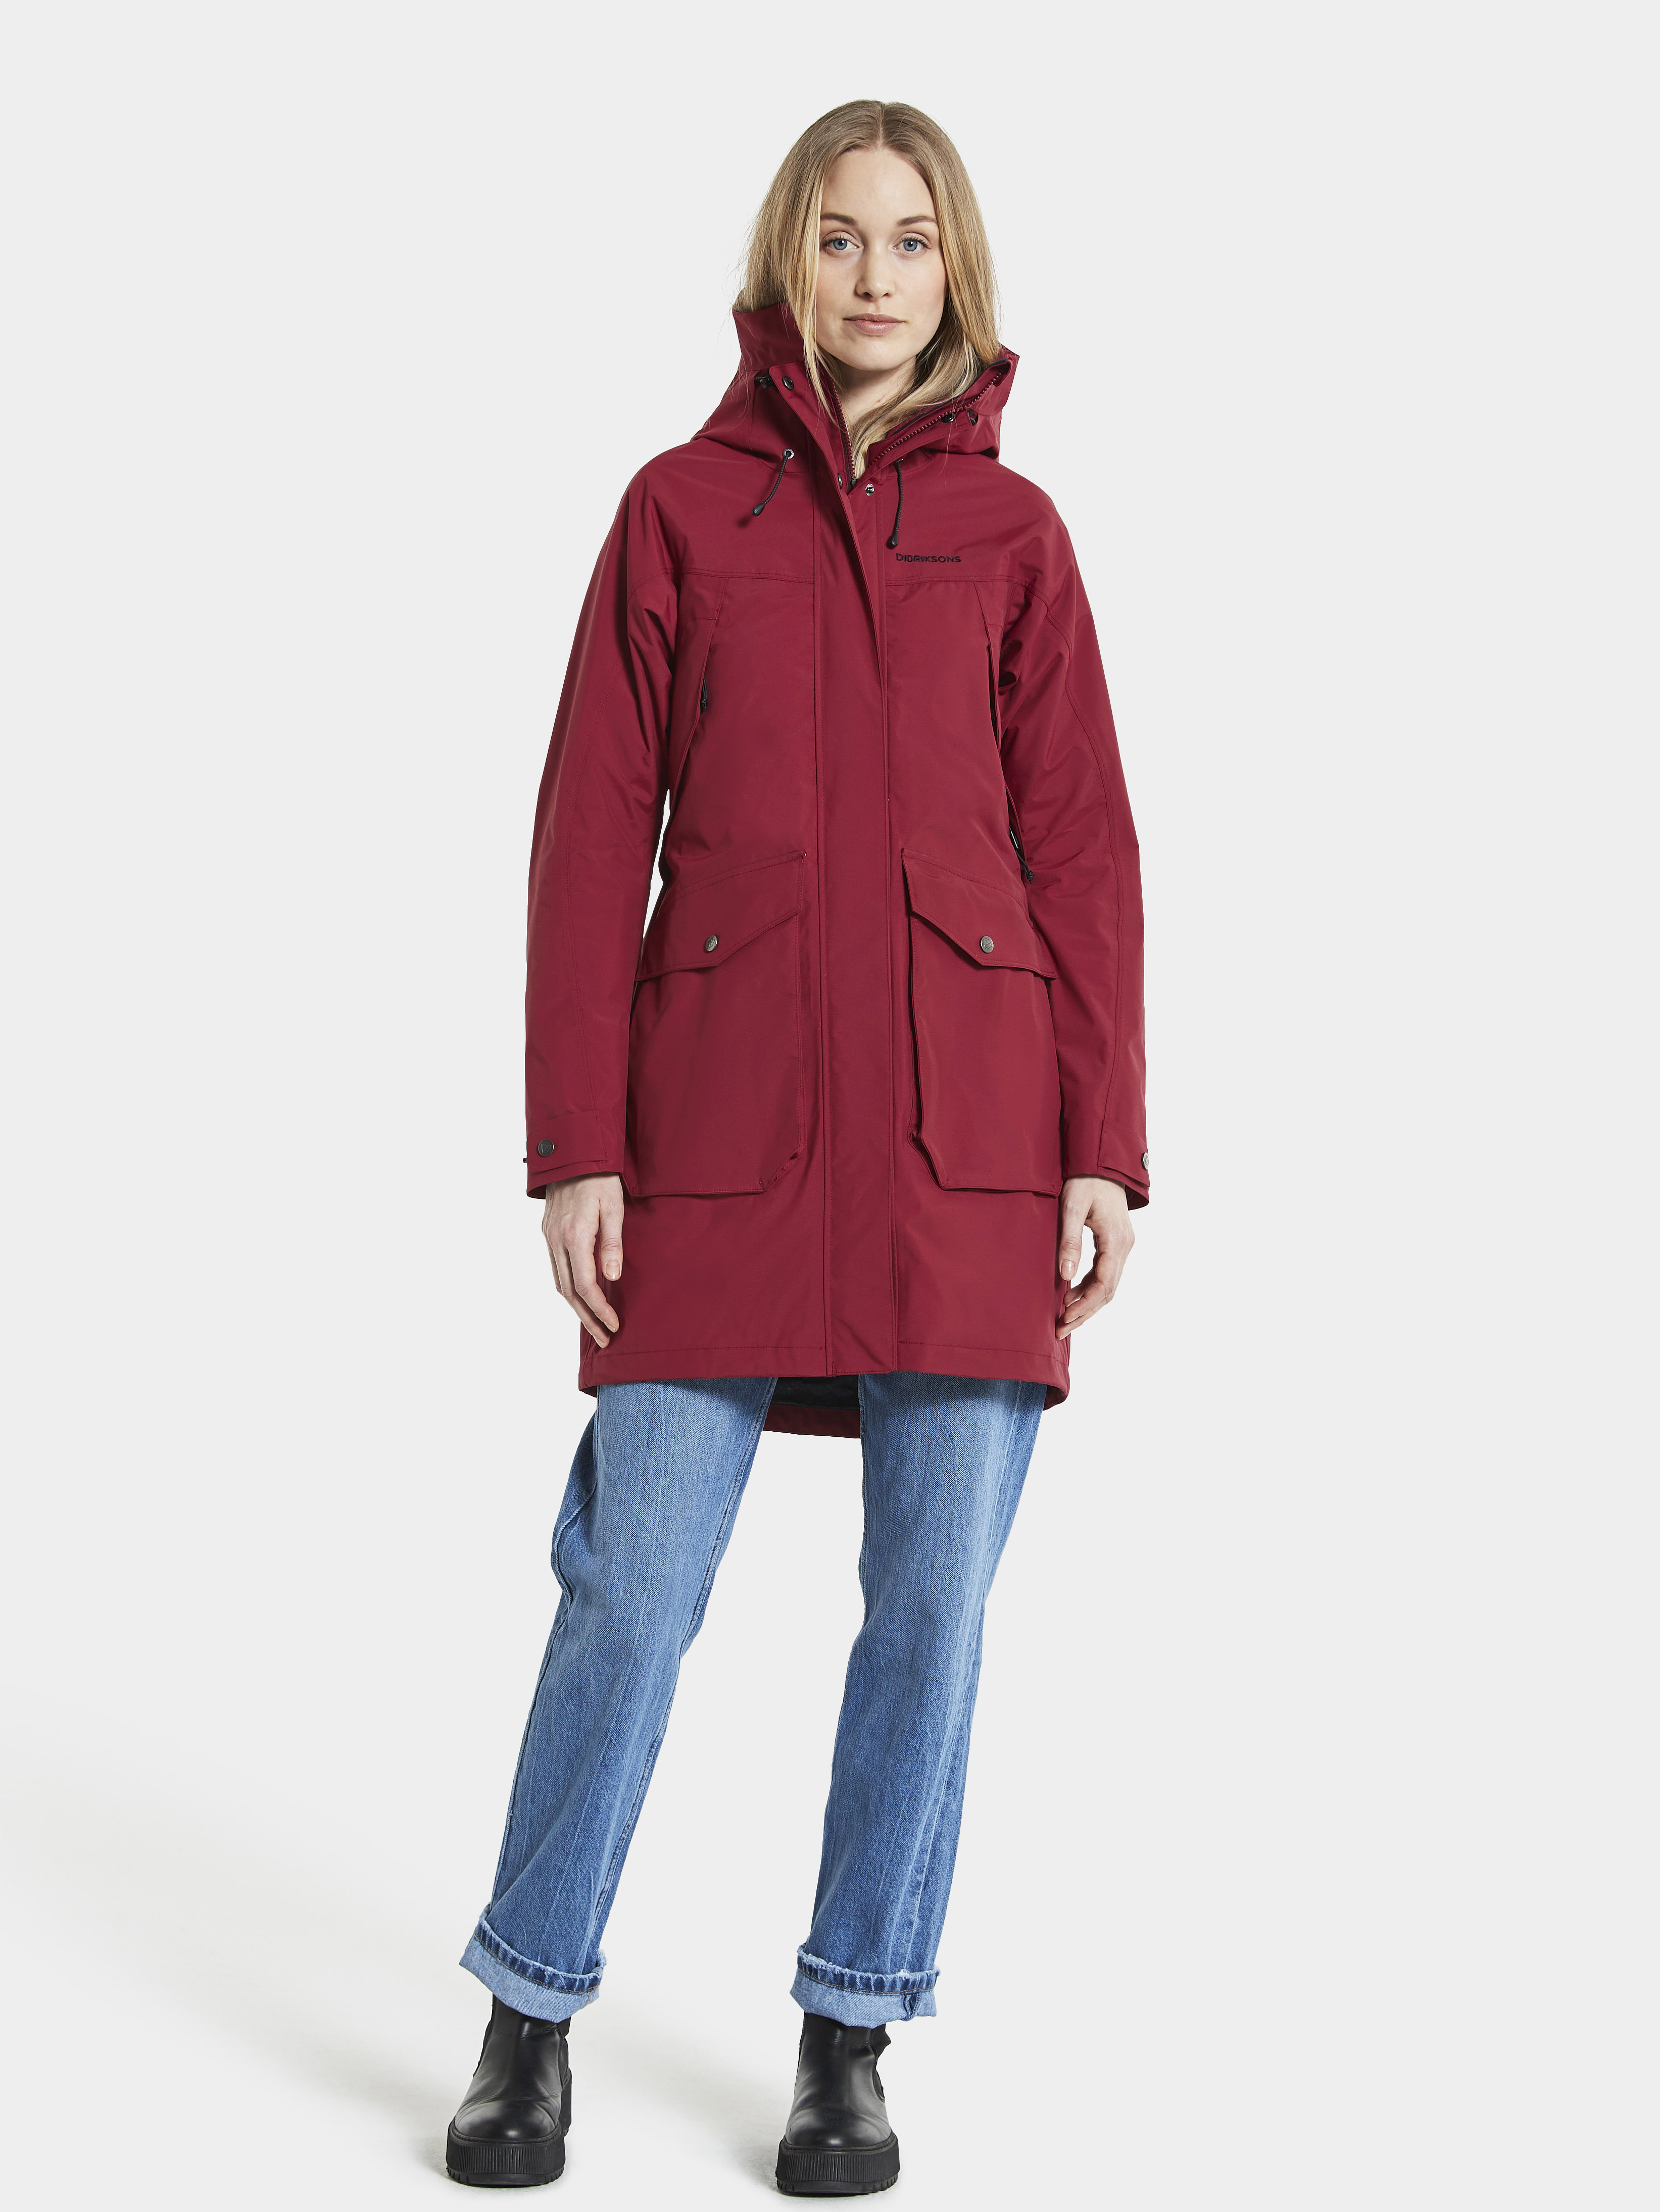 Thelma Women\'s Parka 8 Ruby Red | Buy Thelma Women\'s Parka 8 Ruby Red here  | Outnorth